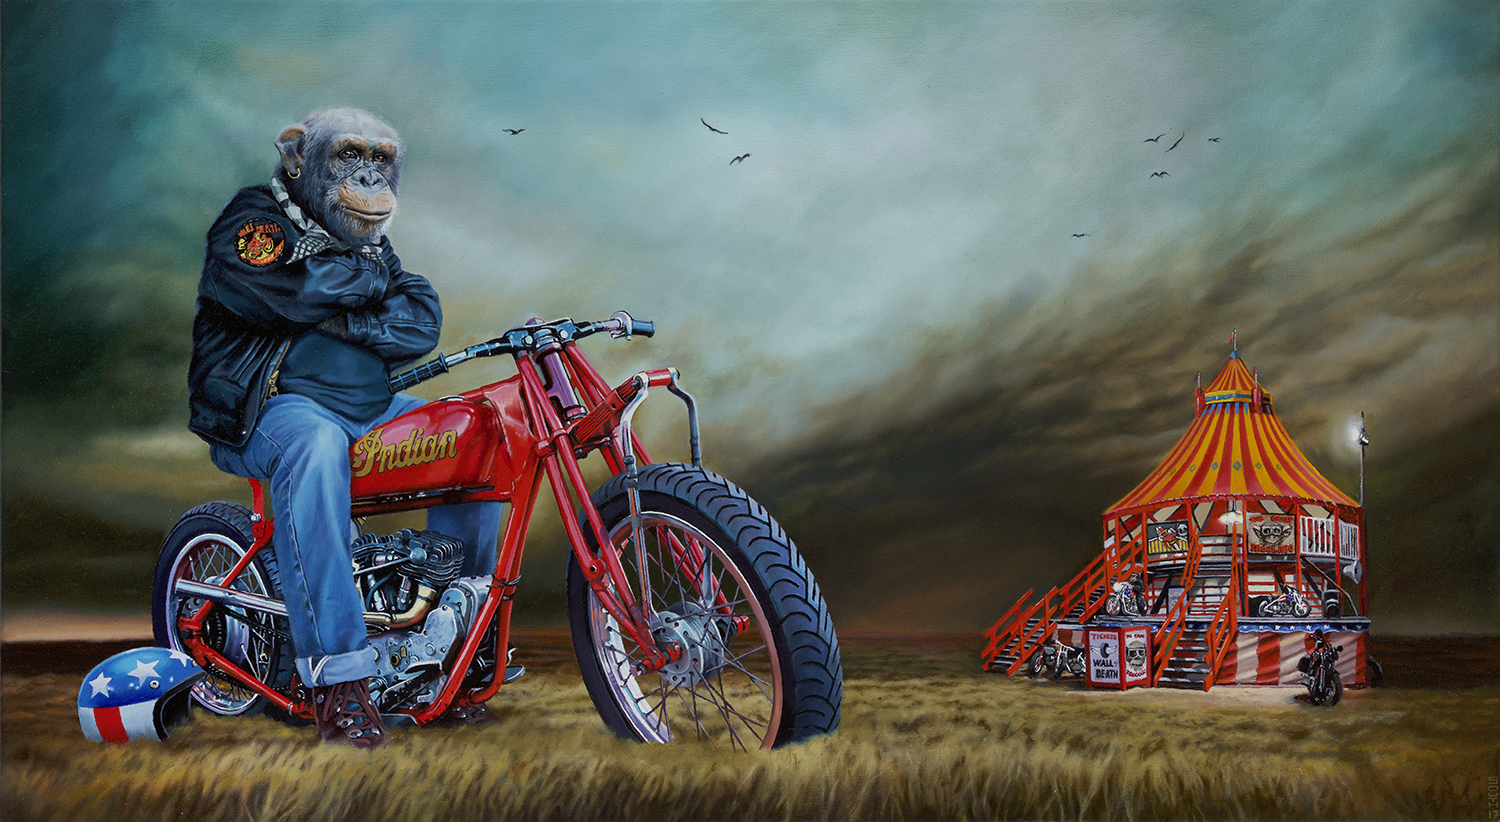 An ape on an Indian motorcycle with a Wall of Death ride in the background - Tony South - The Great Troglato